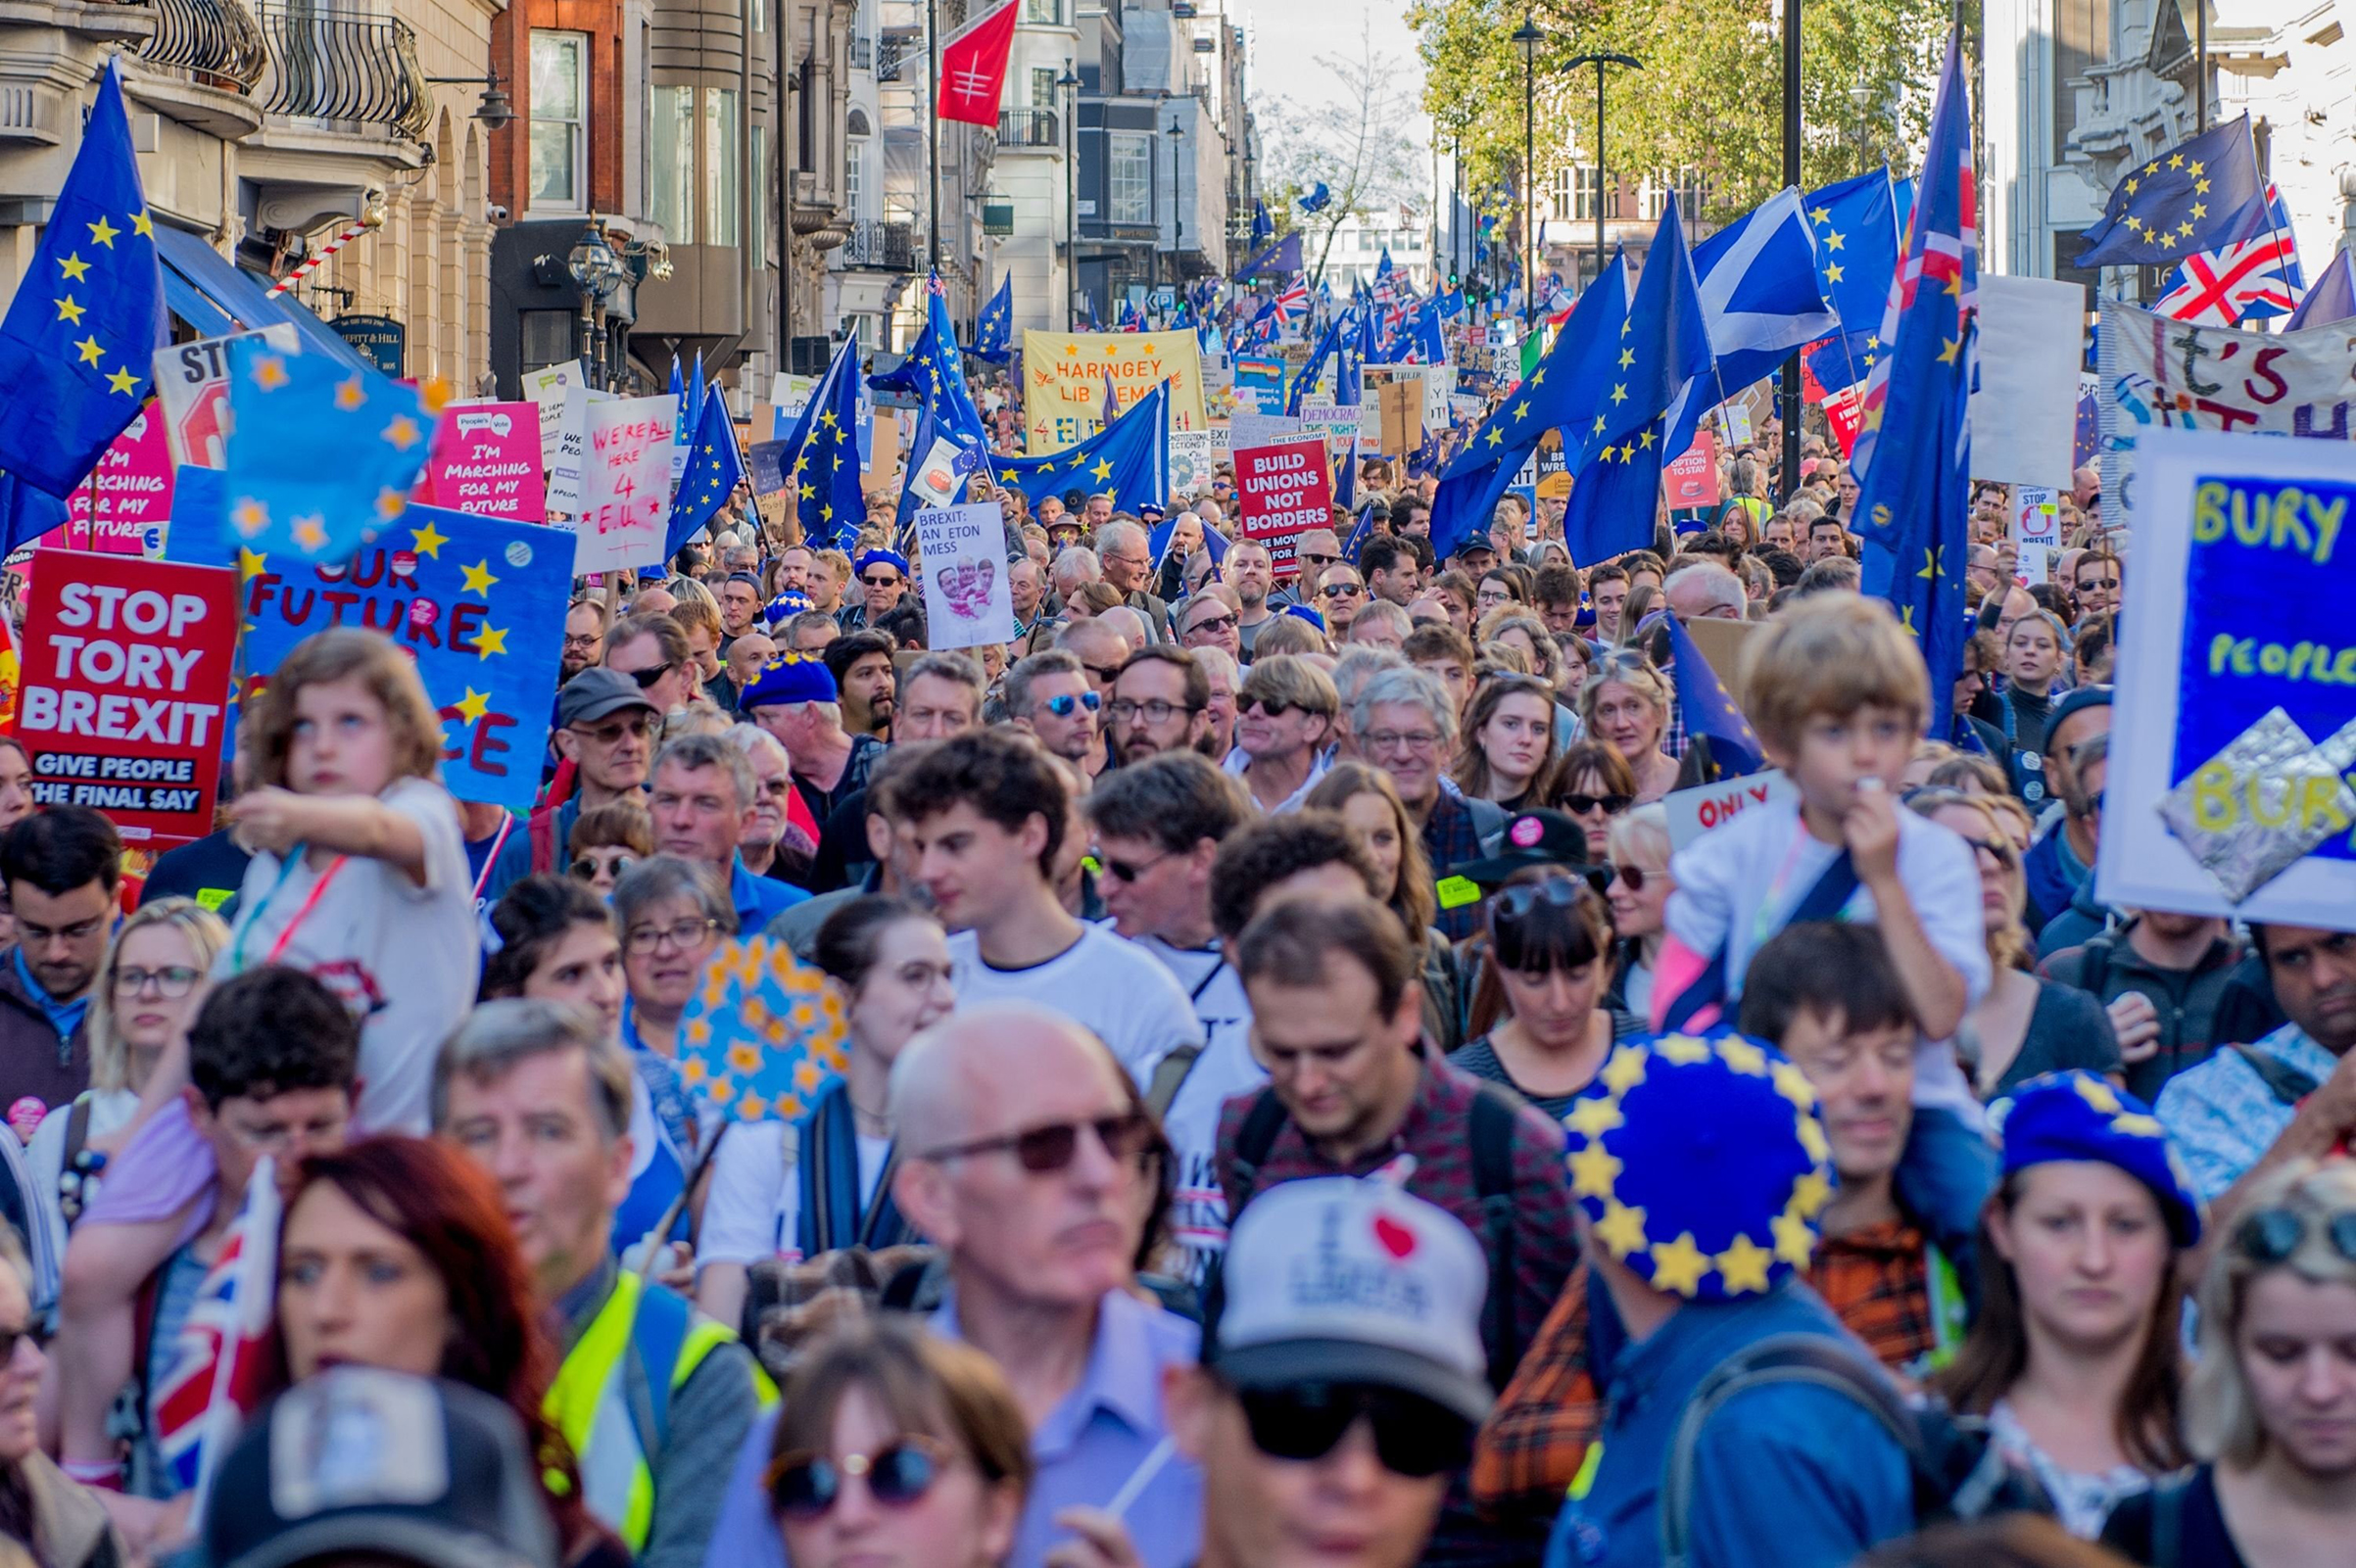 Some 700,000 people marched in London on Oct. 20 to demand a public vote on the final Brexit deal (RMV/Shutterstock)